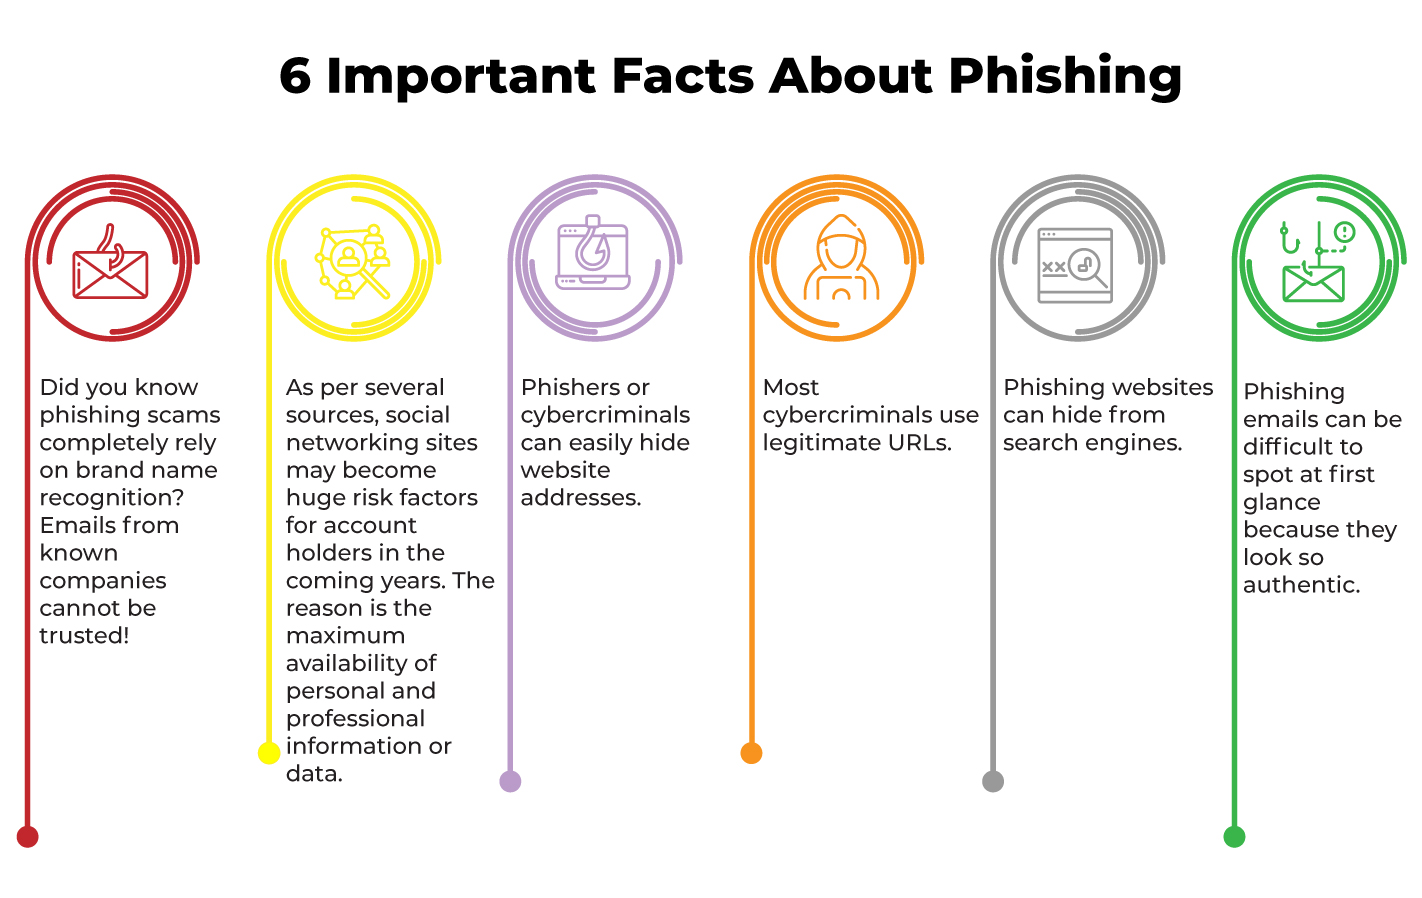 Facts about phishing